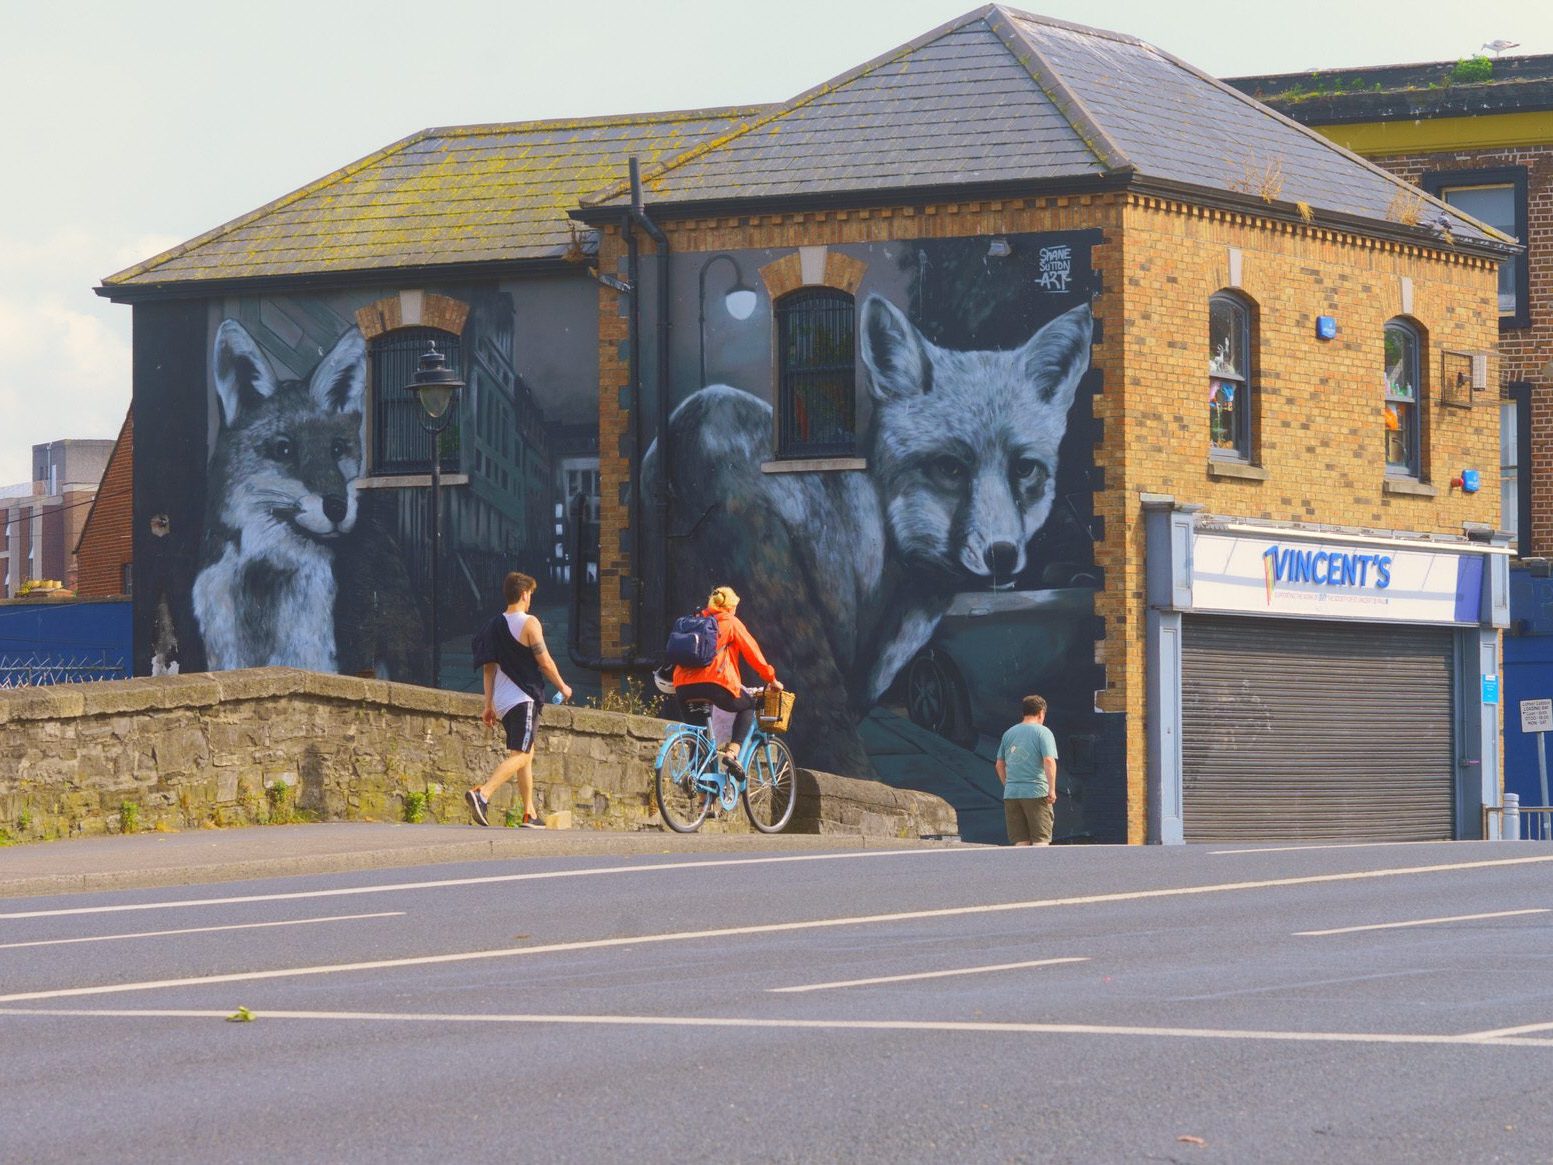 CITY FOXES BY SHANE SUTTON [VINCENT'S DRUMCONDRA END OF DORSET STREET] 002